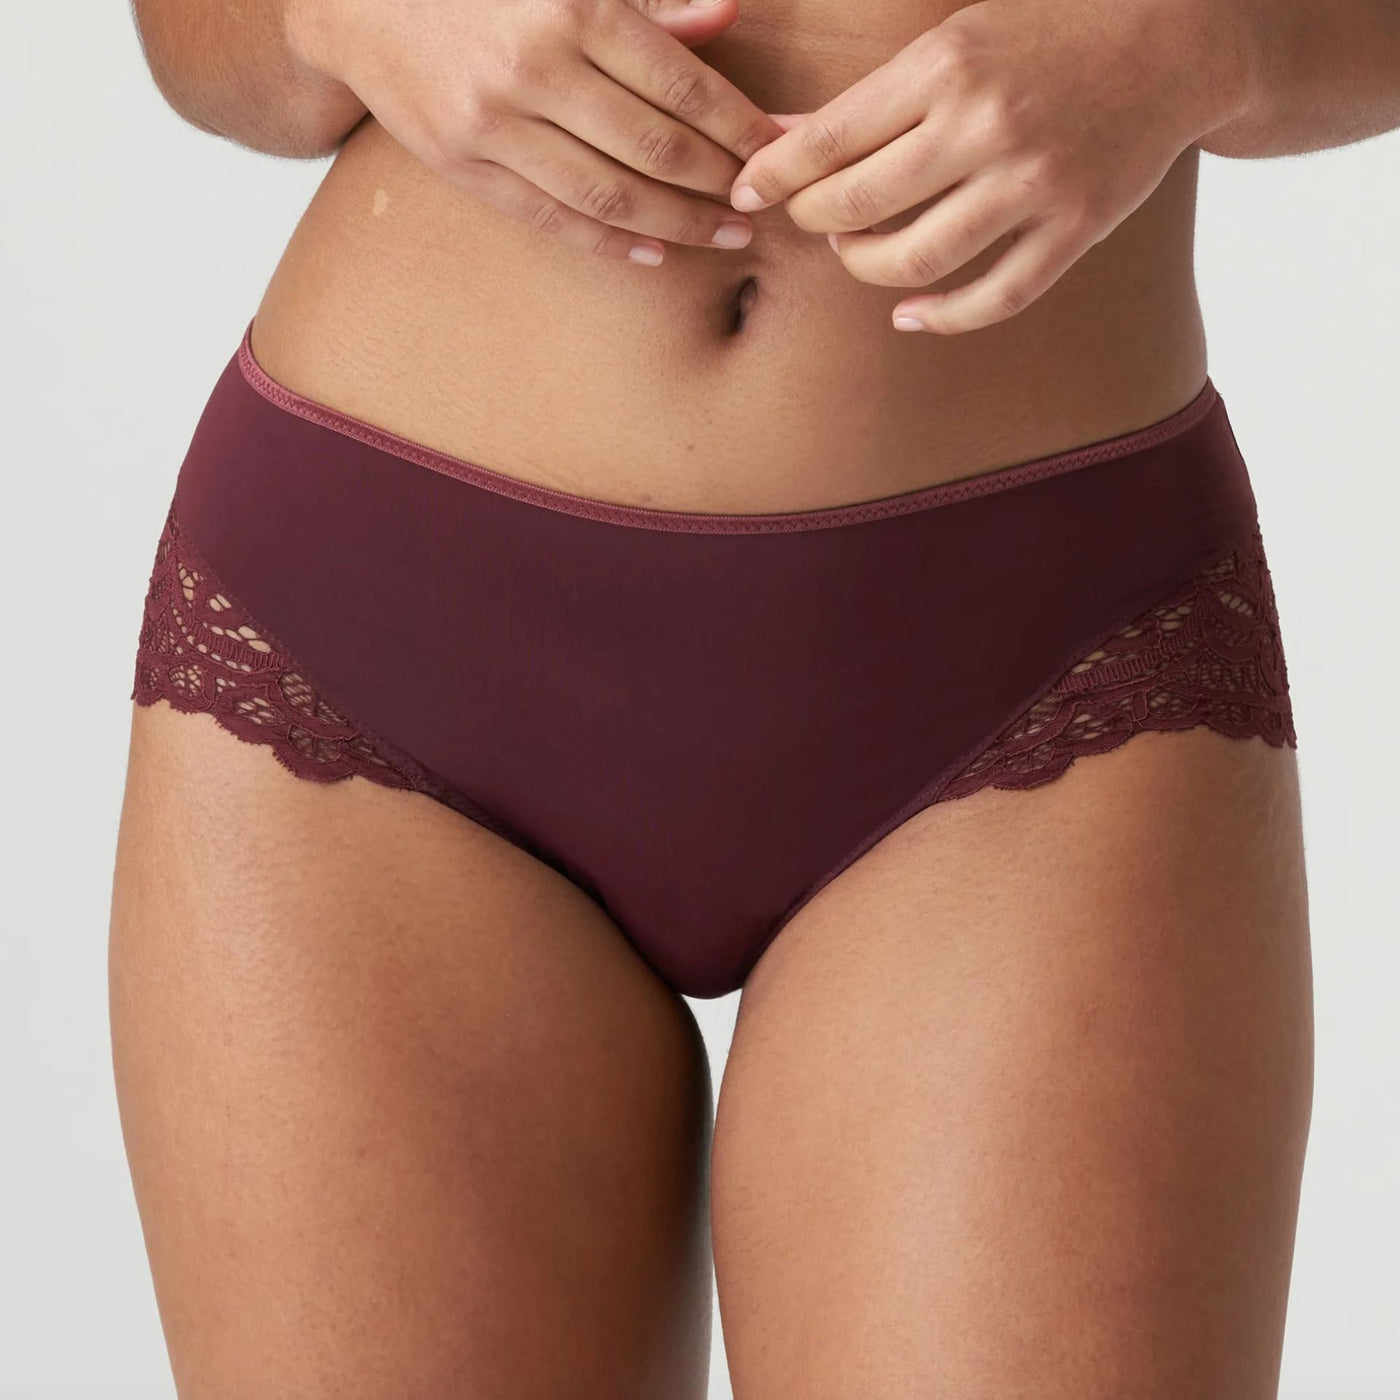 Prima Donna Twist First Night Hot Pant in Merlot 0541882-Panties-Prima Donna-Merlot-Medium-Anna Bella Fine Lingerie, Reveal Your Most Gorgeous Self!